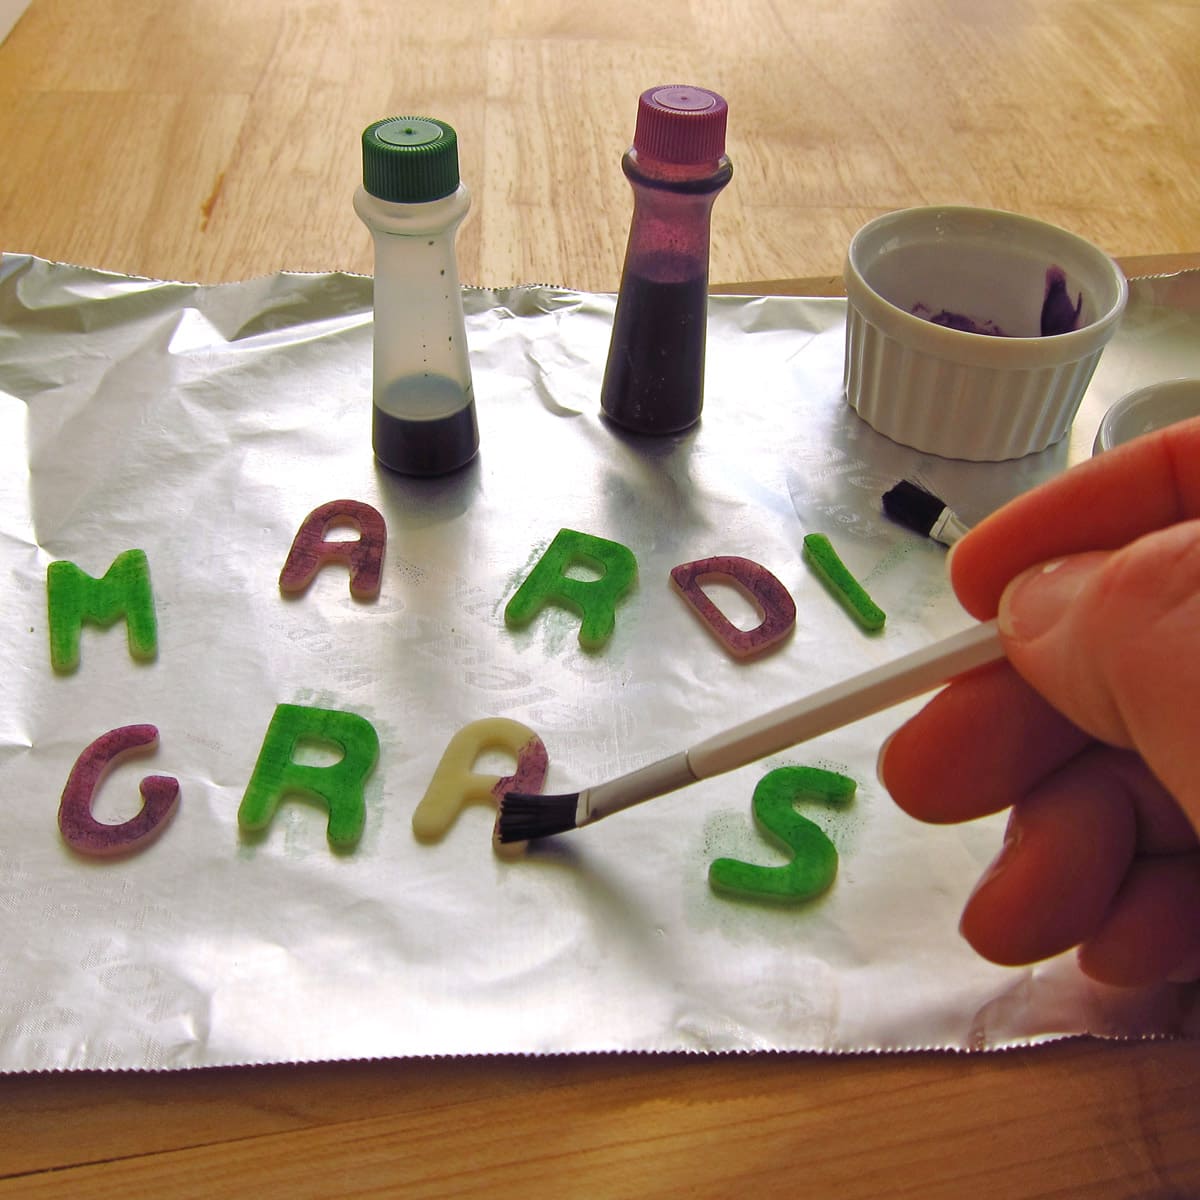 brush food coloring over the cut-out mozzarella cheese letters